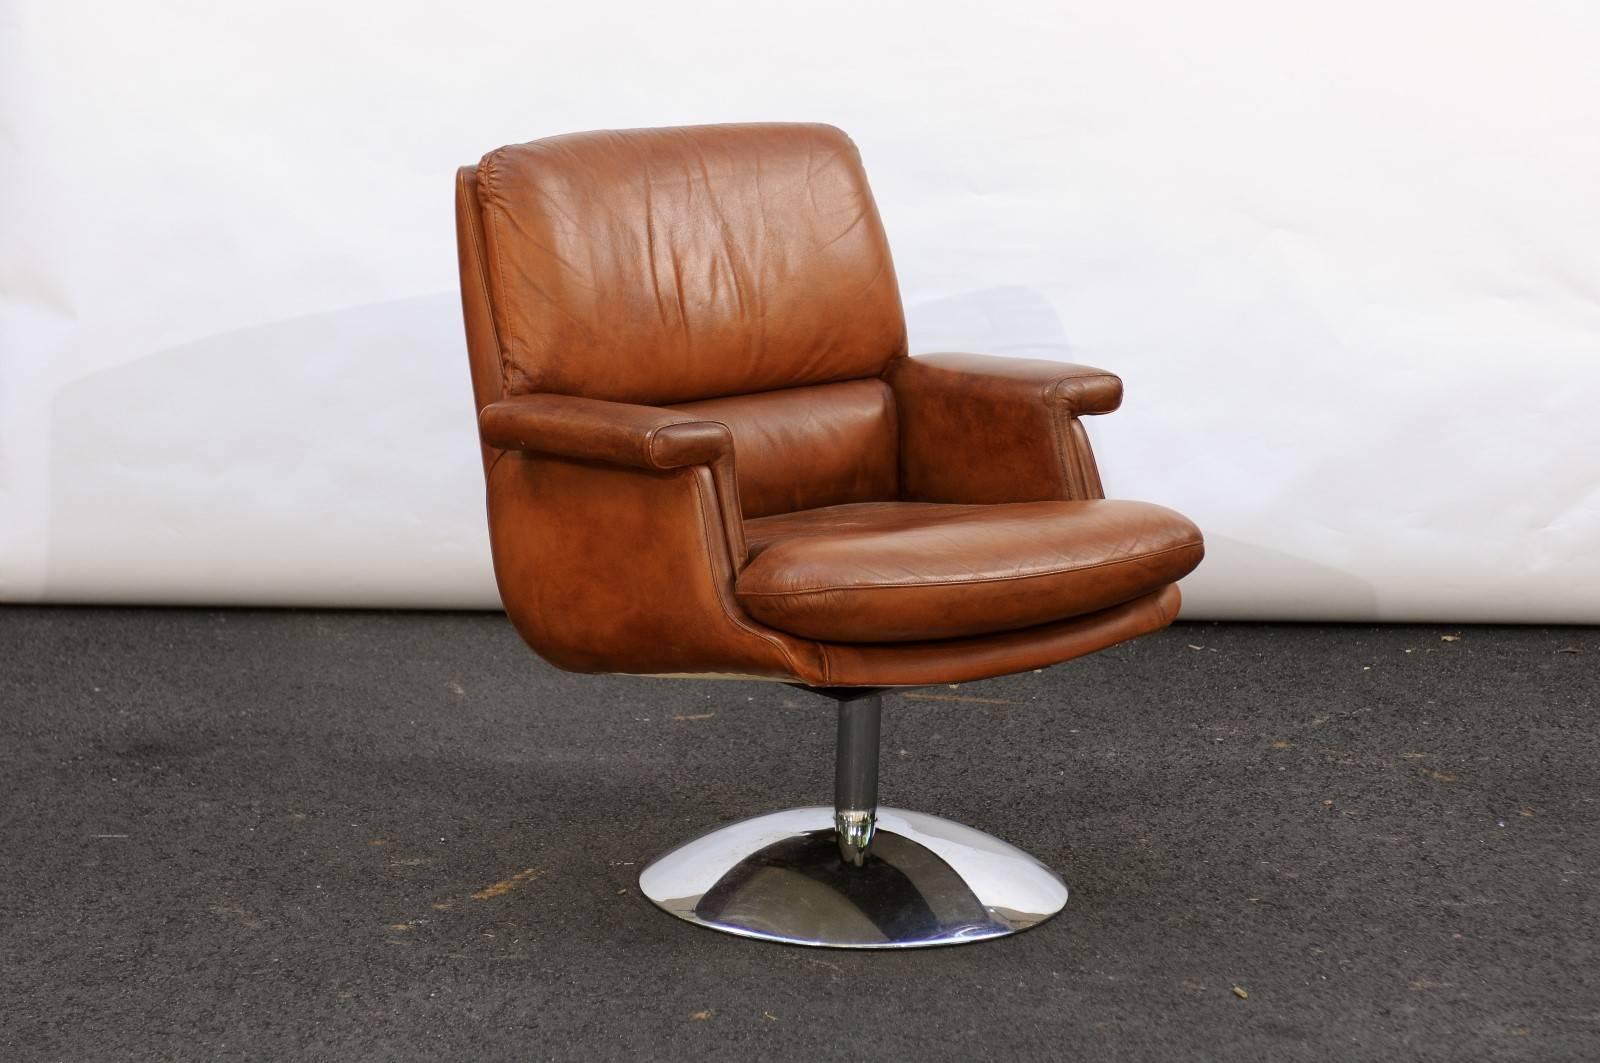 A French Mid-Century Modern leather armchairs with aluminium tulip shaped base. Feels like buttah! That’s what we said when we touched this comfortable leather armchair at a market in Paris. This caramel colored vintage 1960s leather armchair is